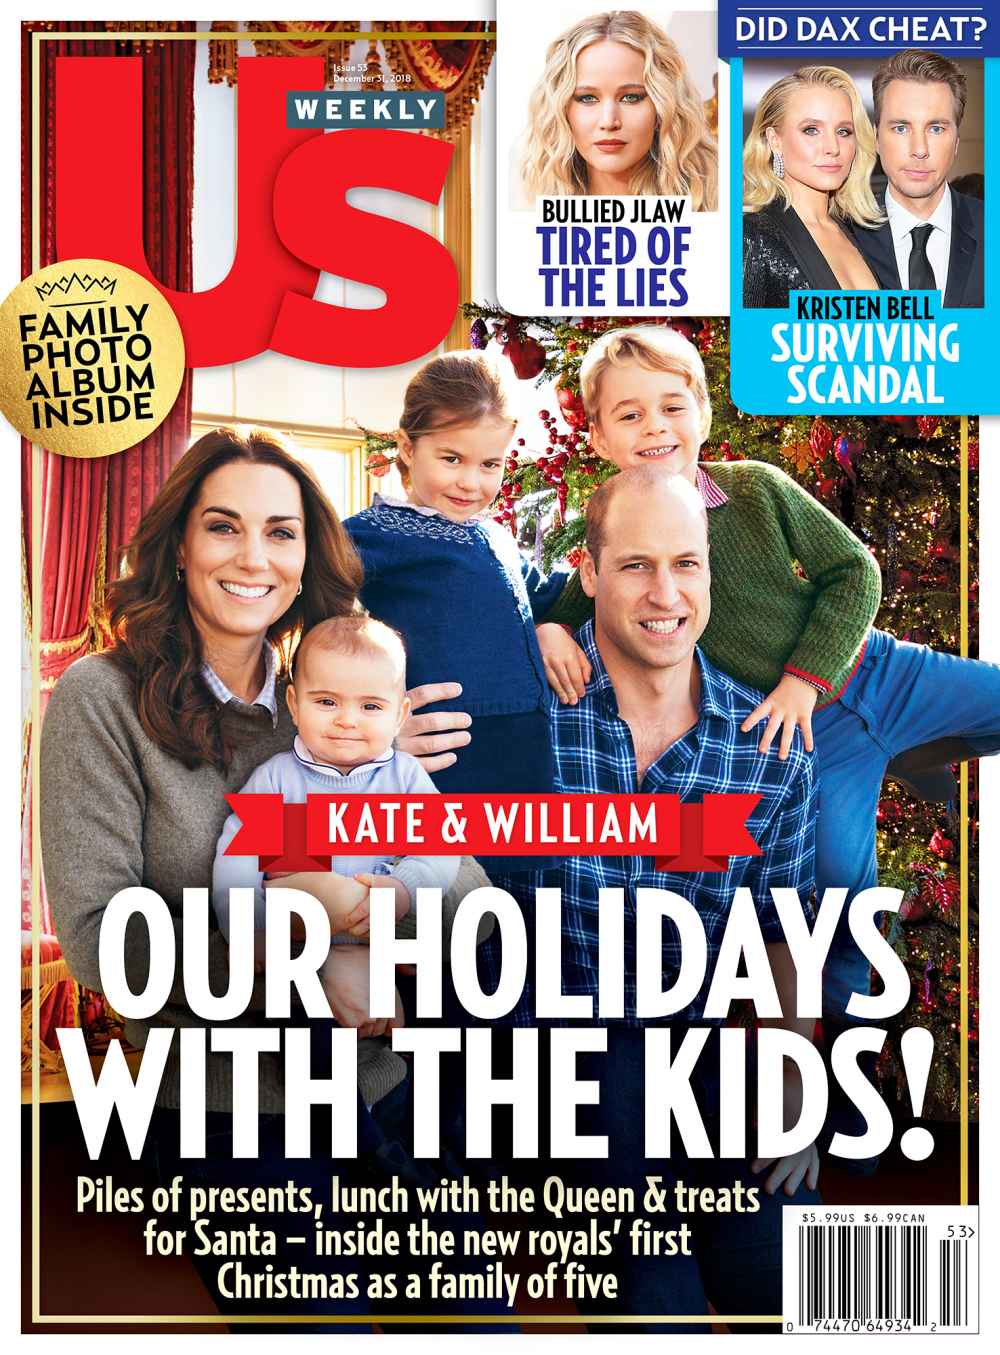 Us Weekly Cover Prince William Duchess Kate Holidays Kids